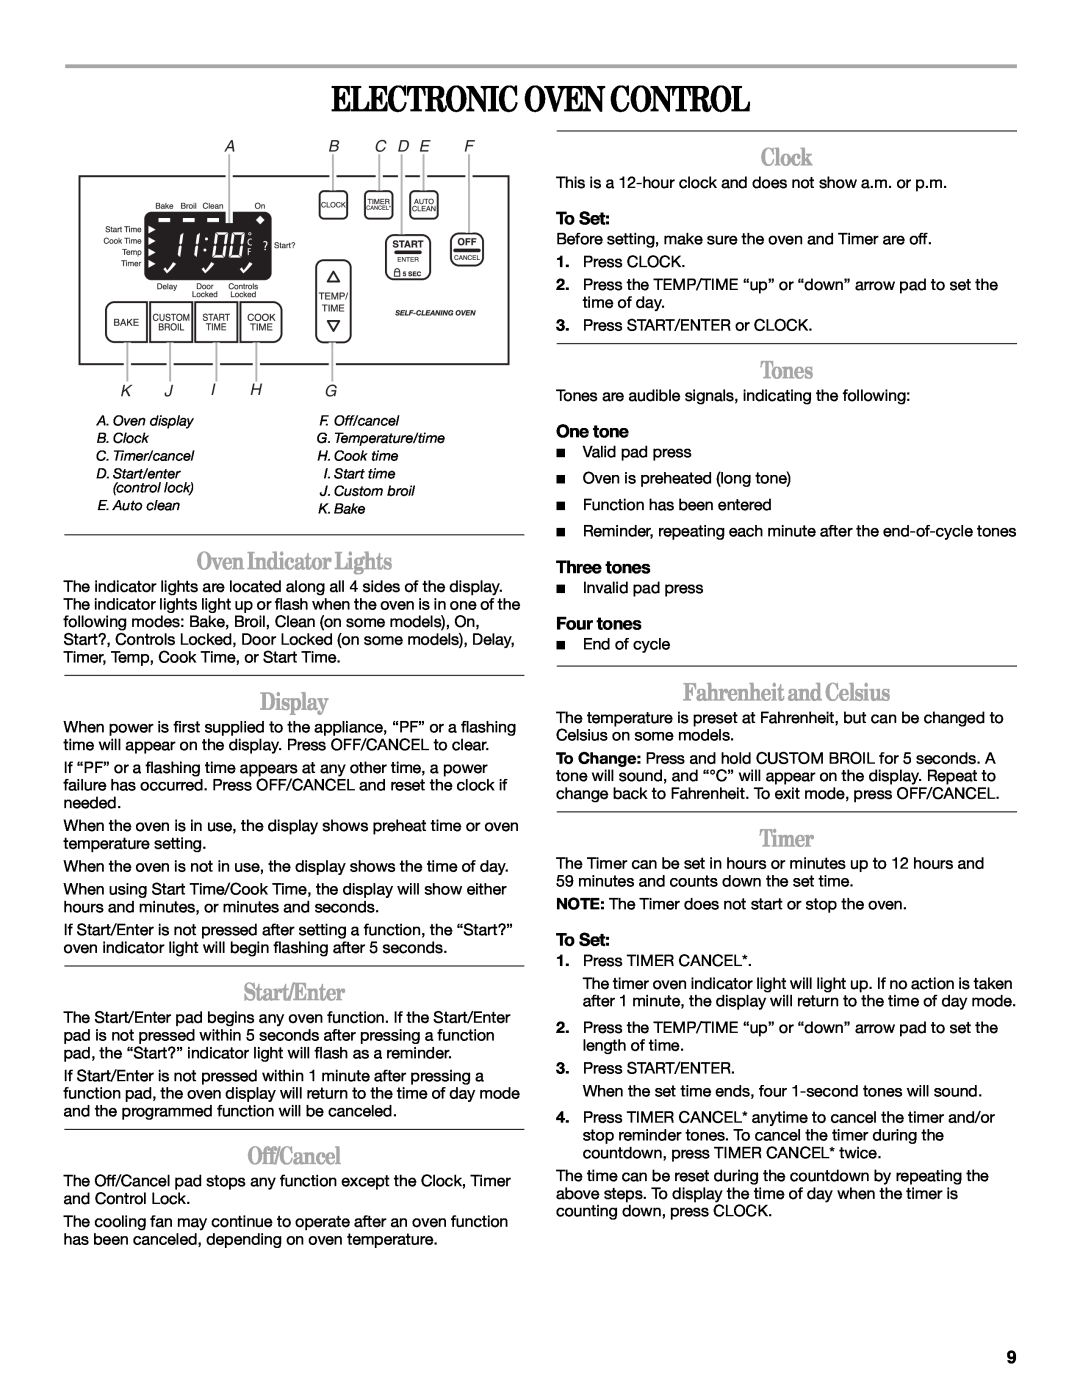 Whirlpool 9762358A Electronic Oven Control, Clock, Oven Indicator Lights, Display, Start/Enter, Off/Cancel, Tones, Timer 